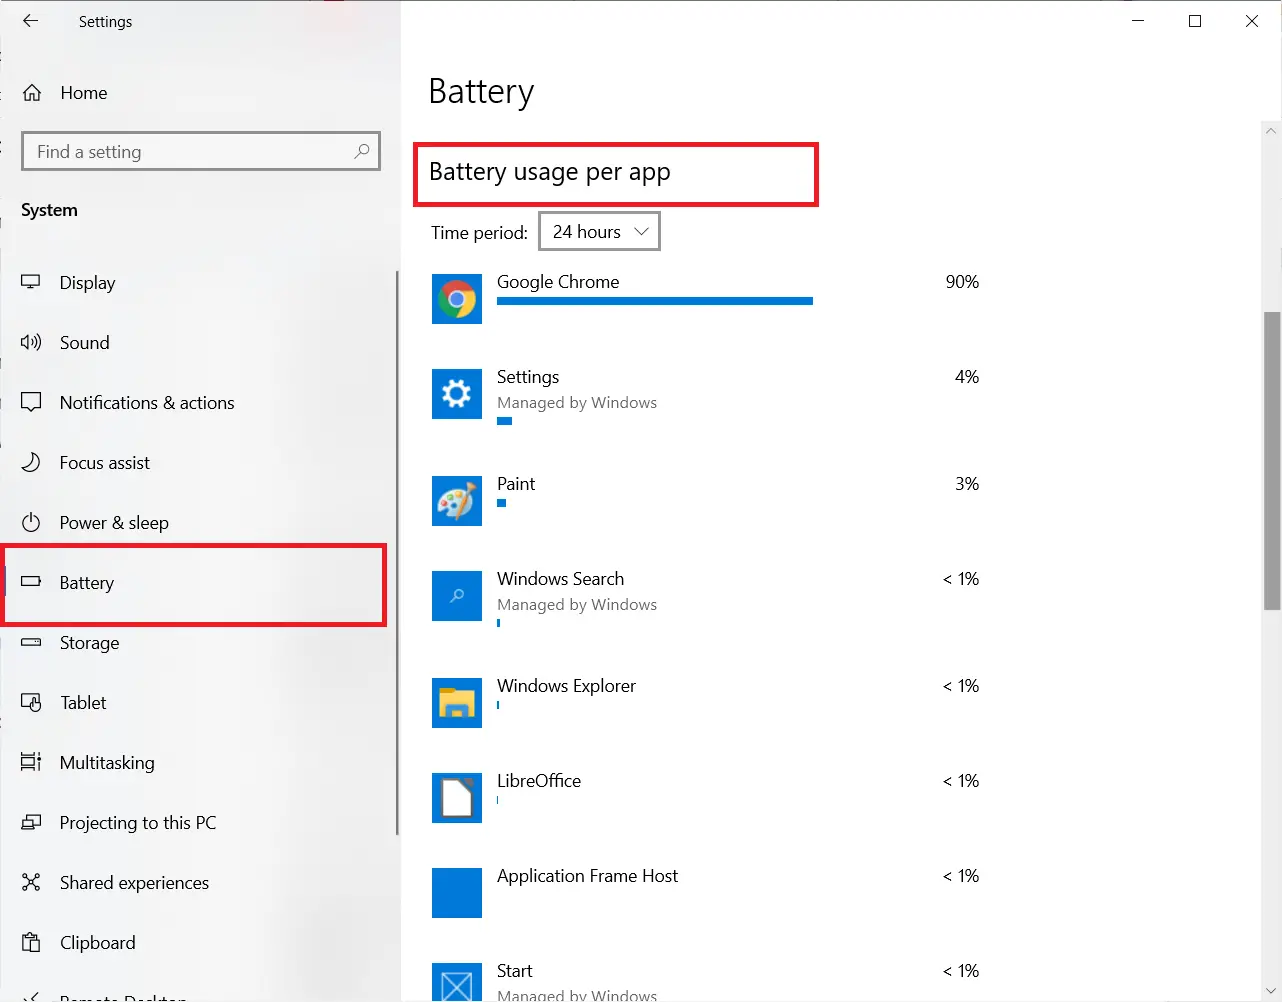 battery usages by apps in Windows 10